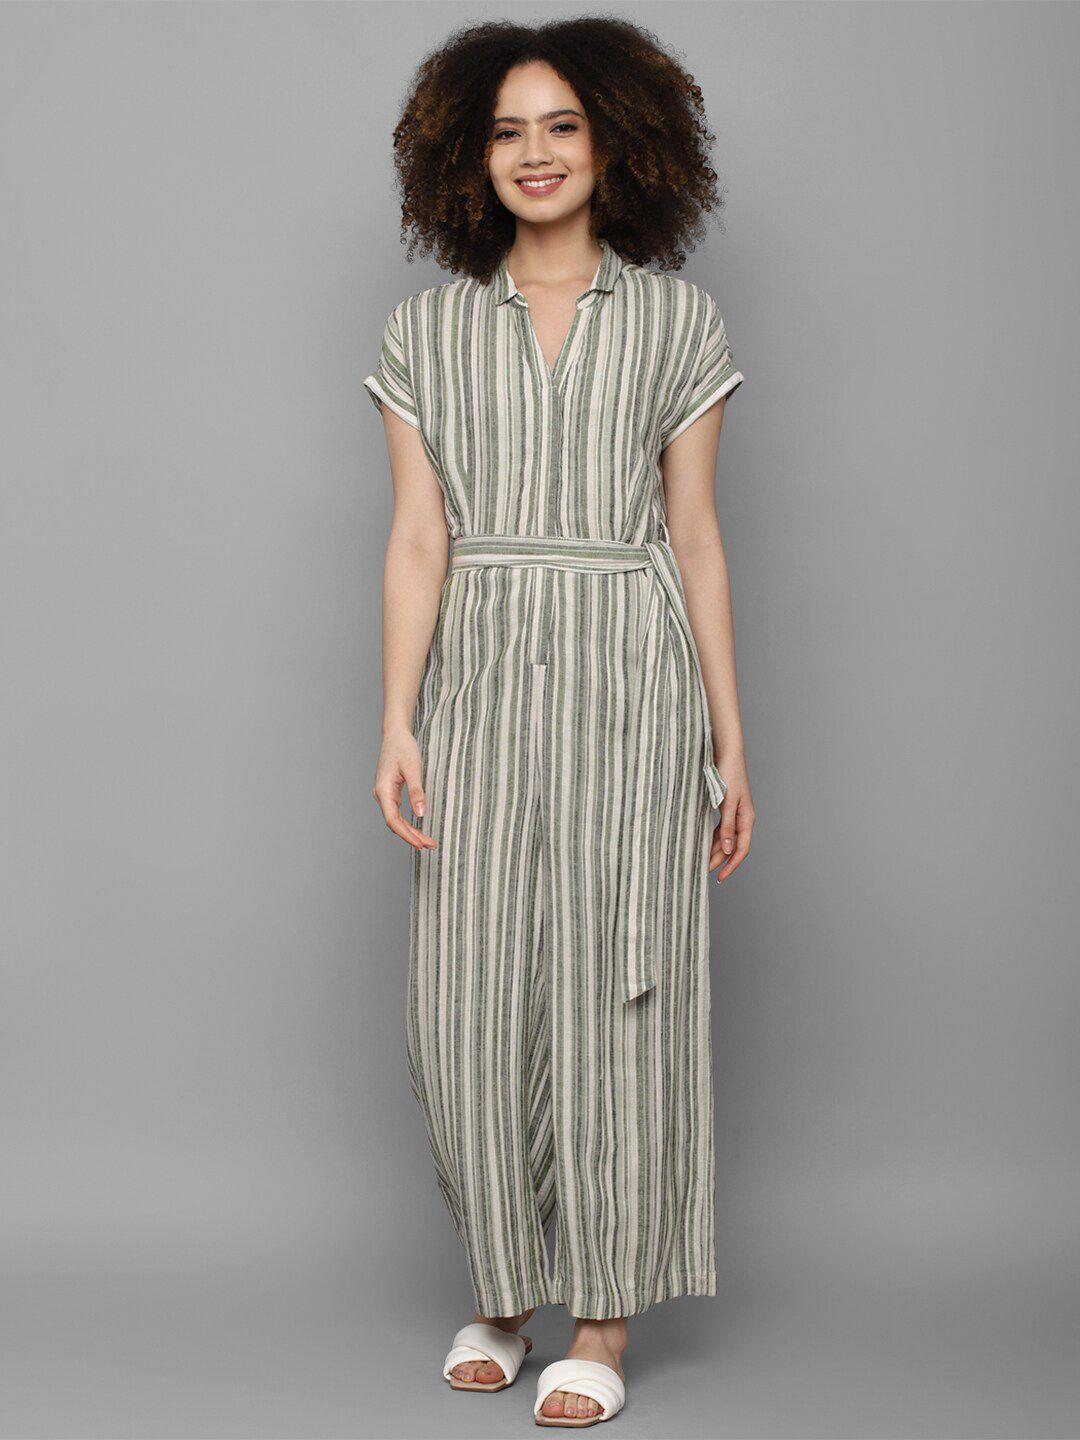 allen solly woman olive green & white linen striped basic jumpsuit